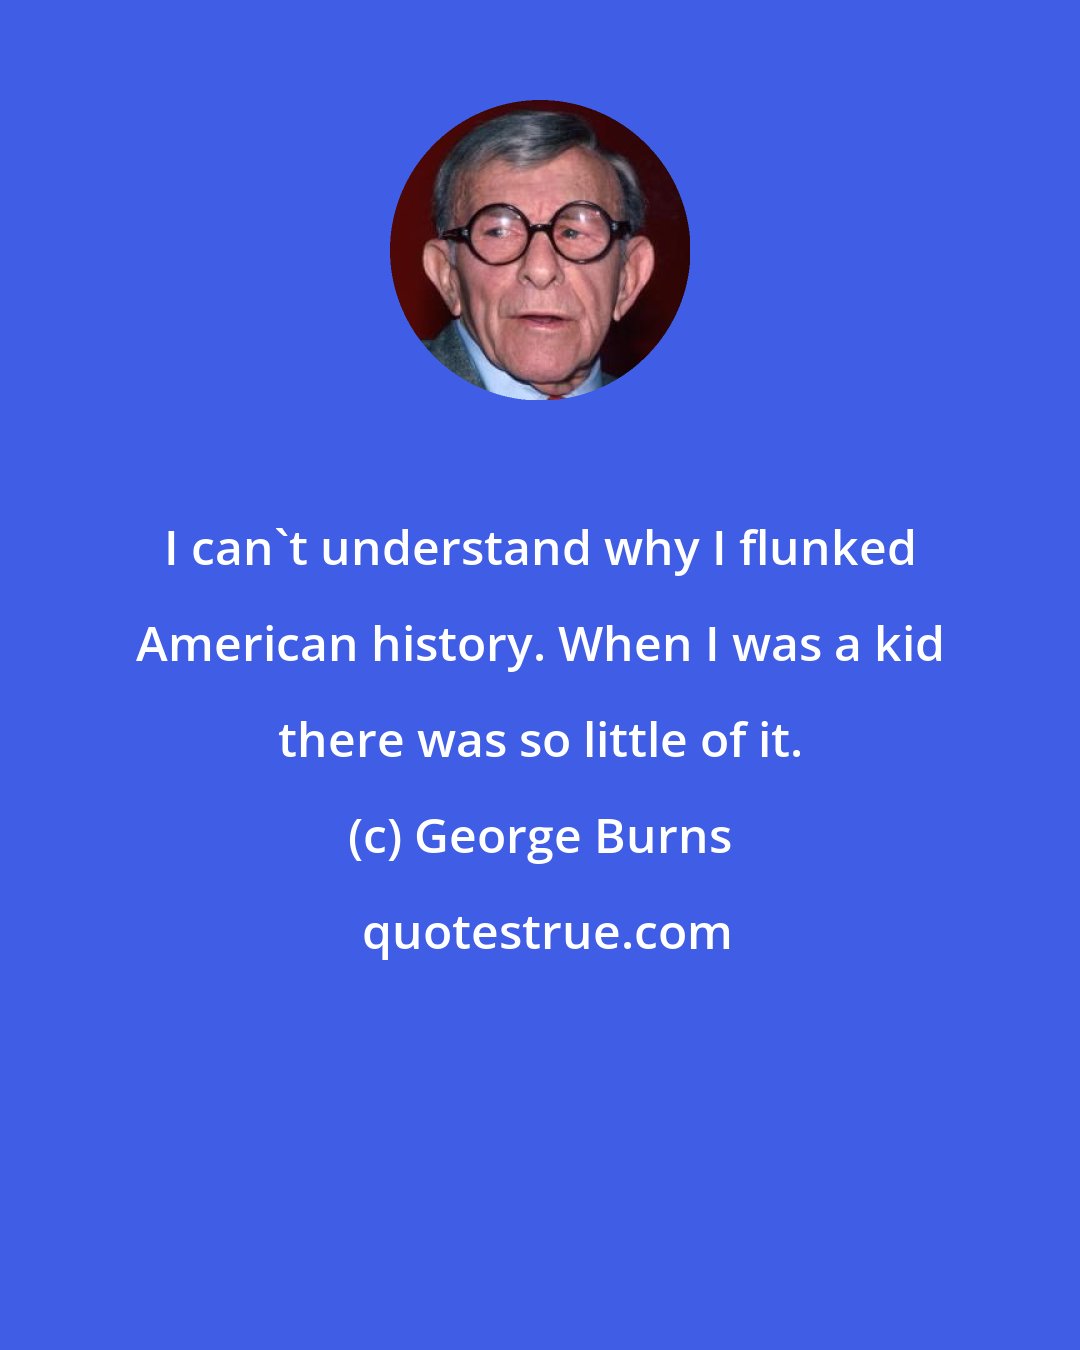 George Burns: I can't understand why I flunked American history. When I was a kid there was so little of it.